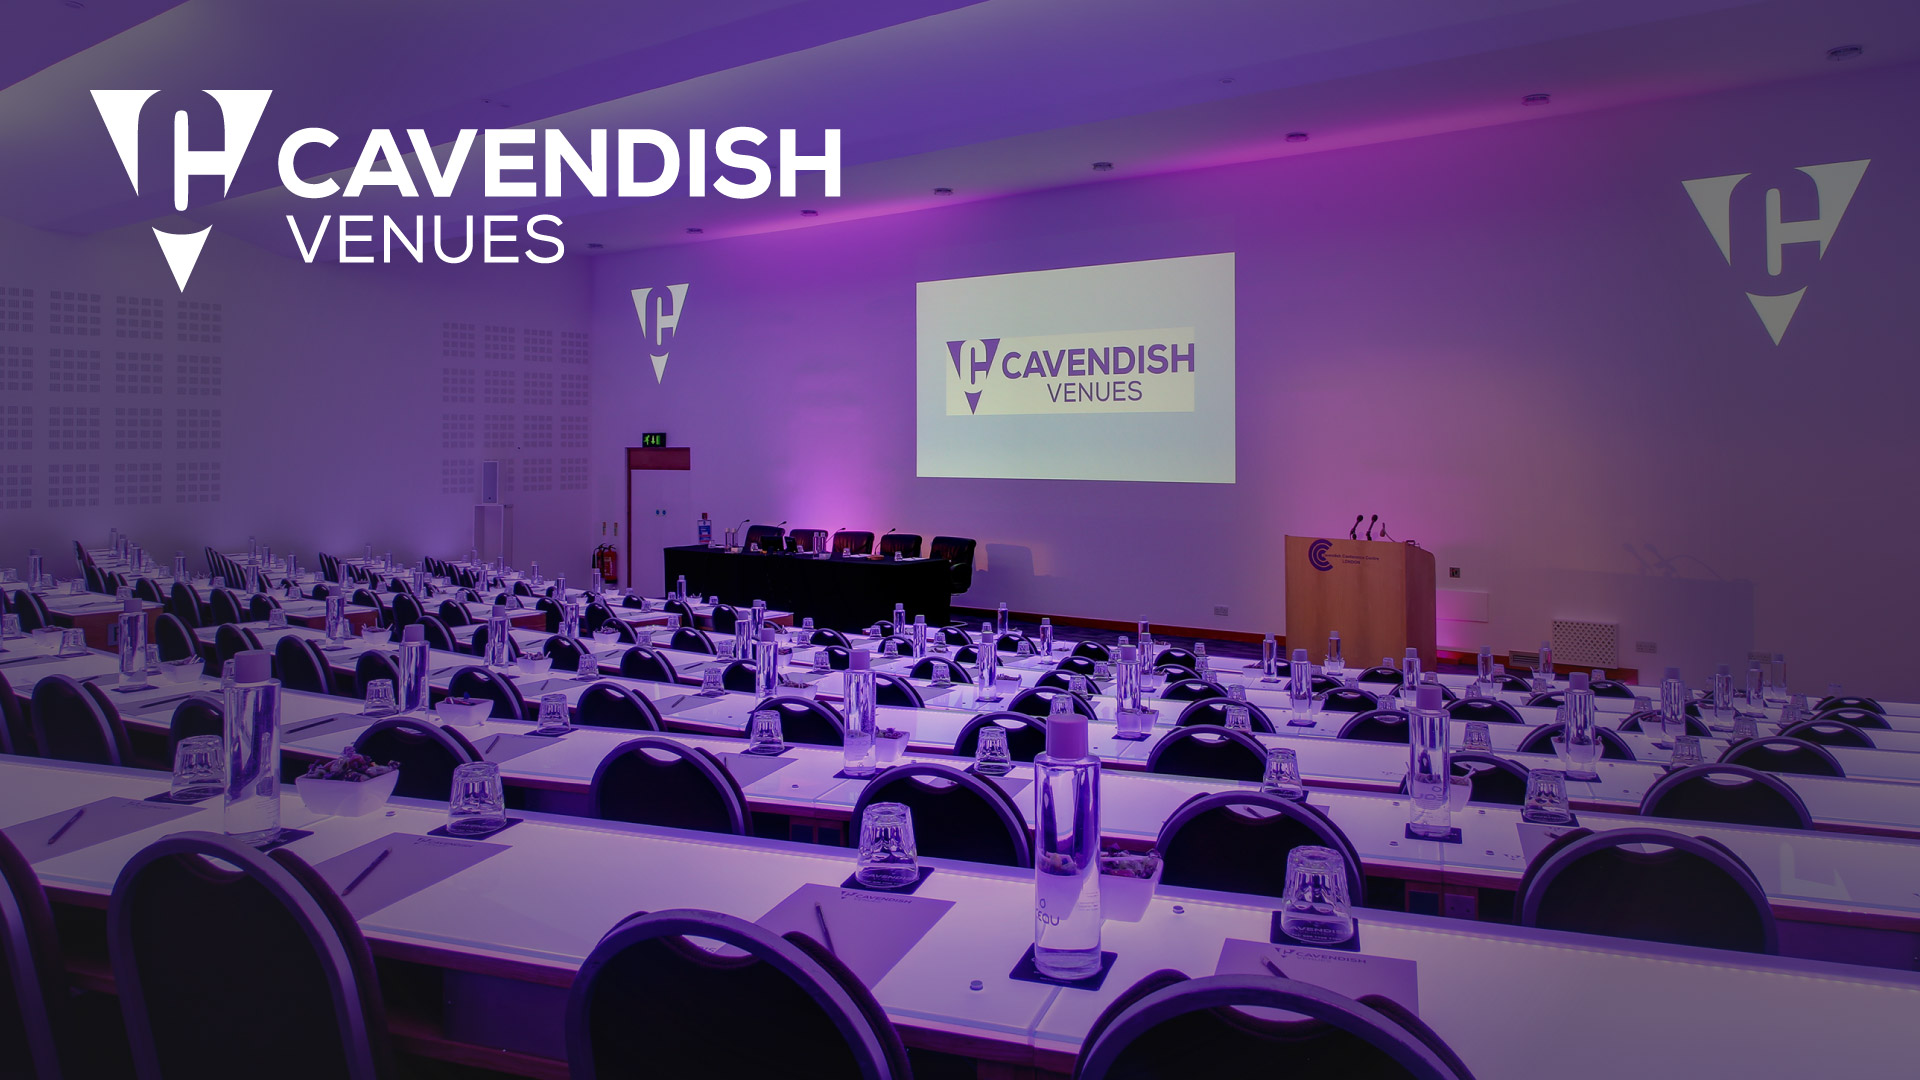 Conference venues branding and website design